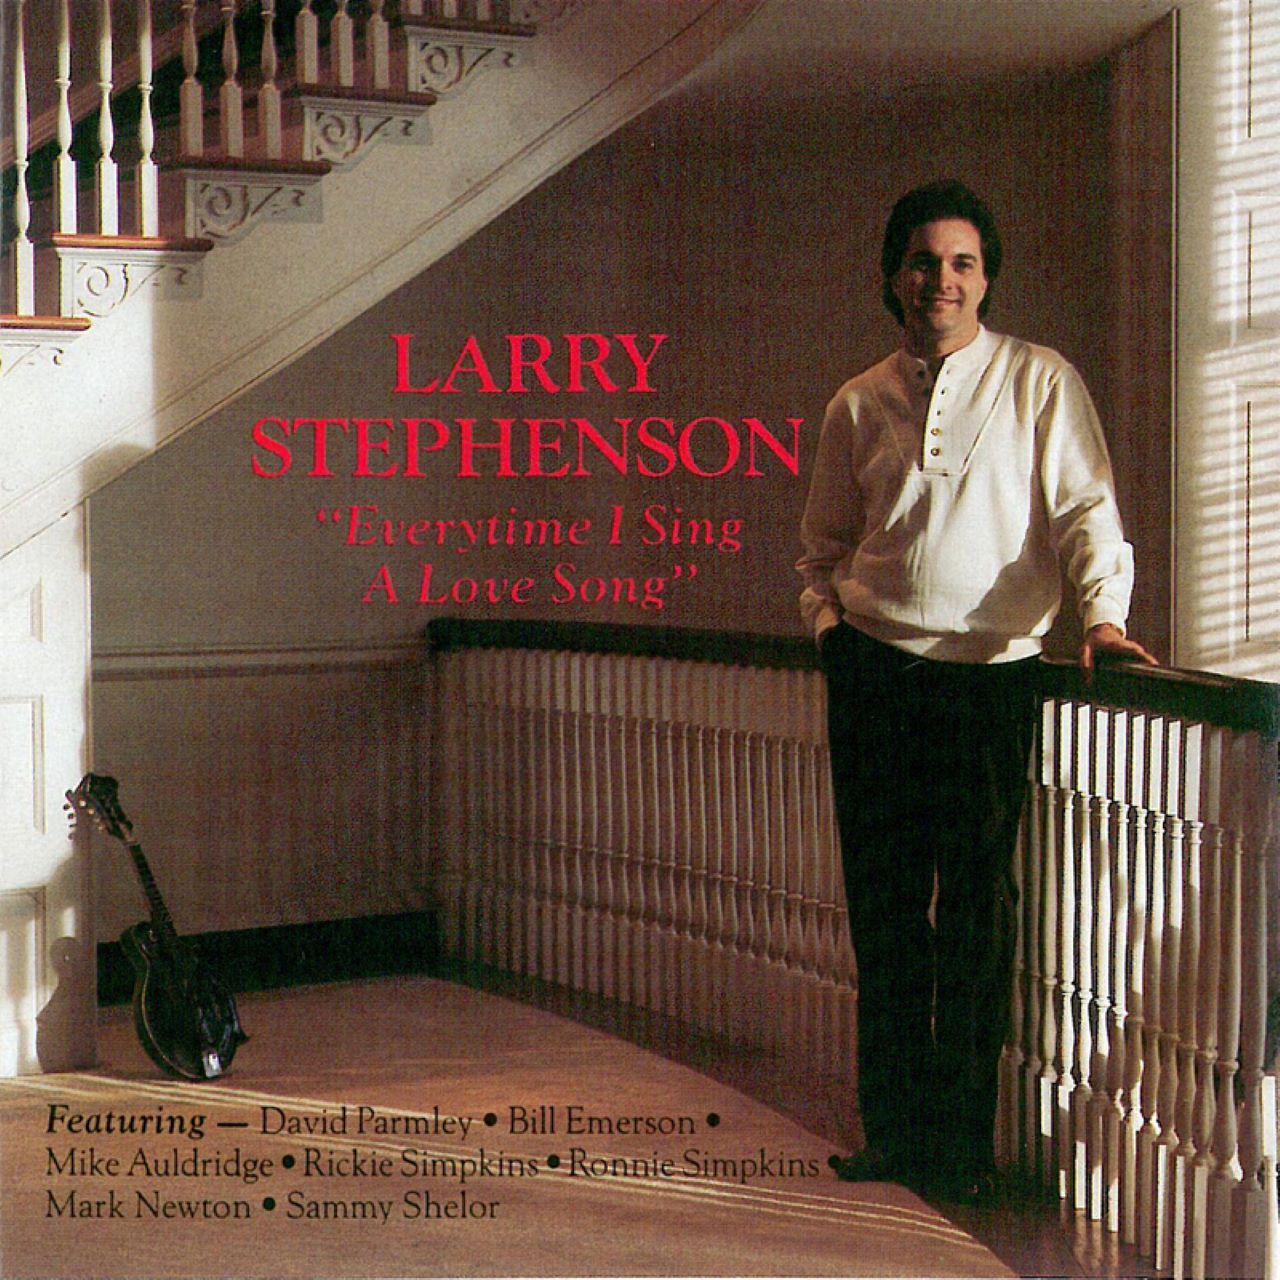 Larry Stephenson - Every Time I Sing A Love Song cover album